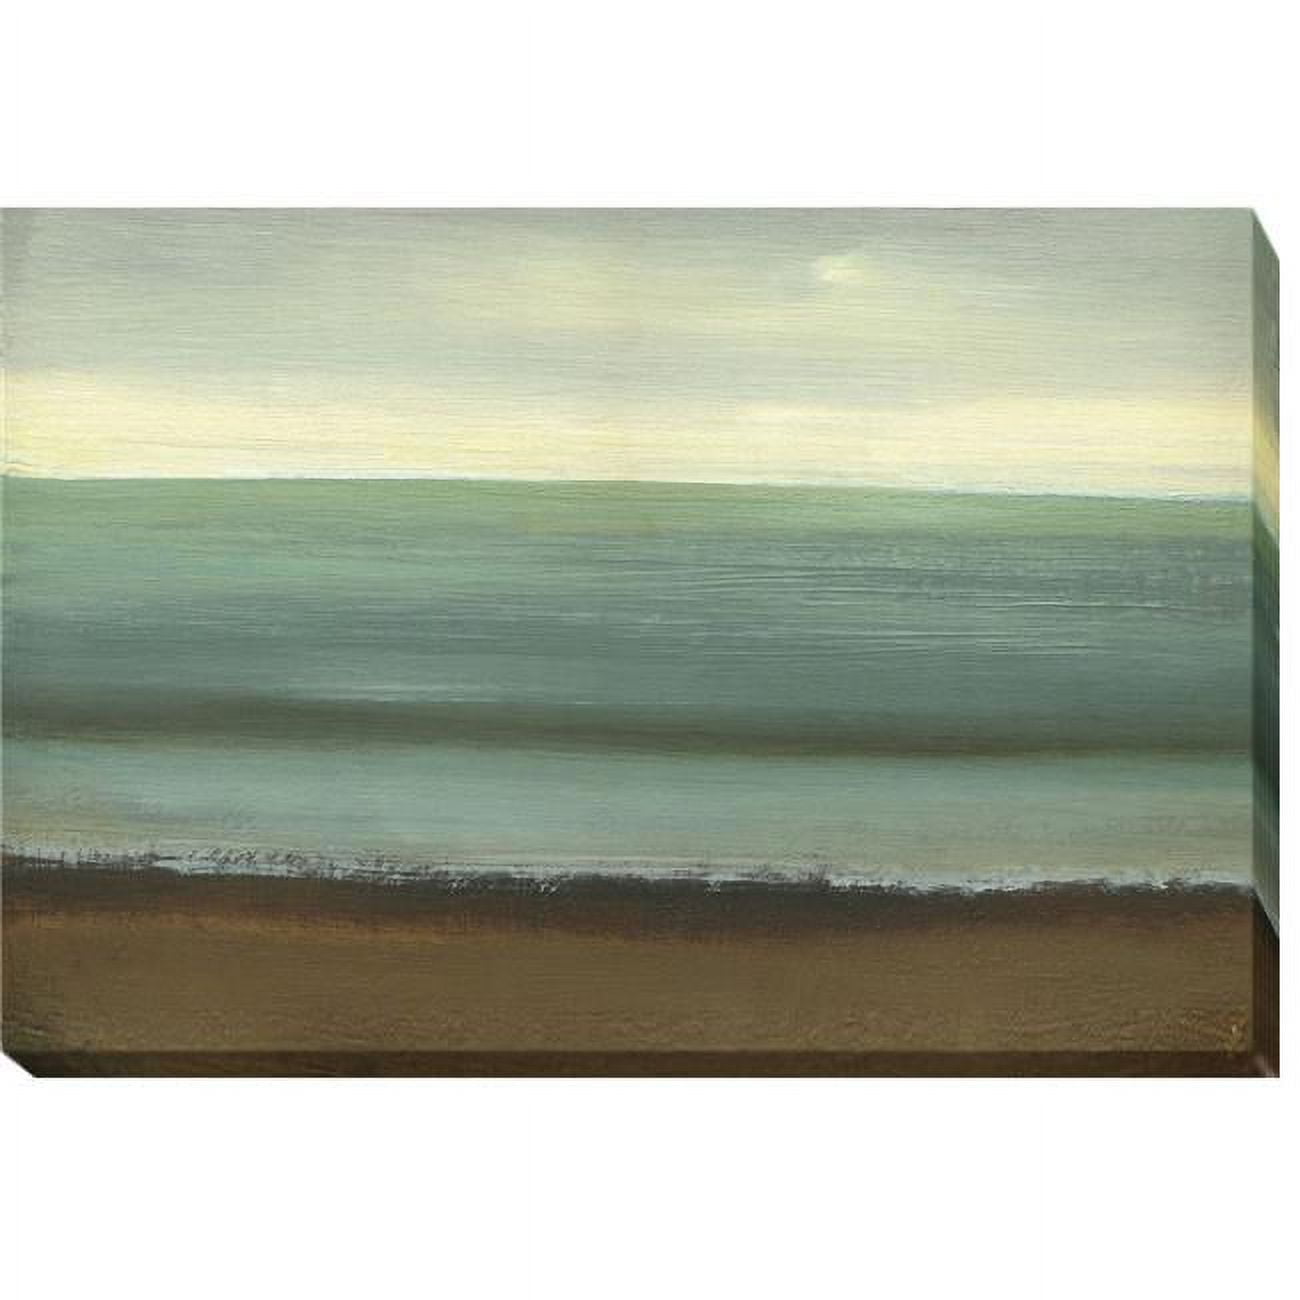 2436o779cg Calm Sea By Caroline Gold Custom Gallery-wrapped Canvas Giclee Art - Ready To Hang, 24 X 36 X 1.5 In.